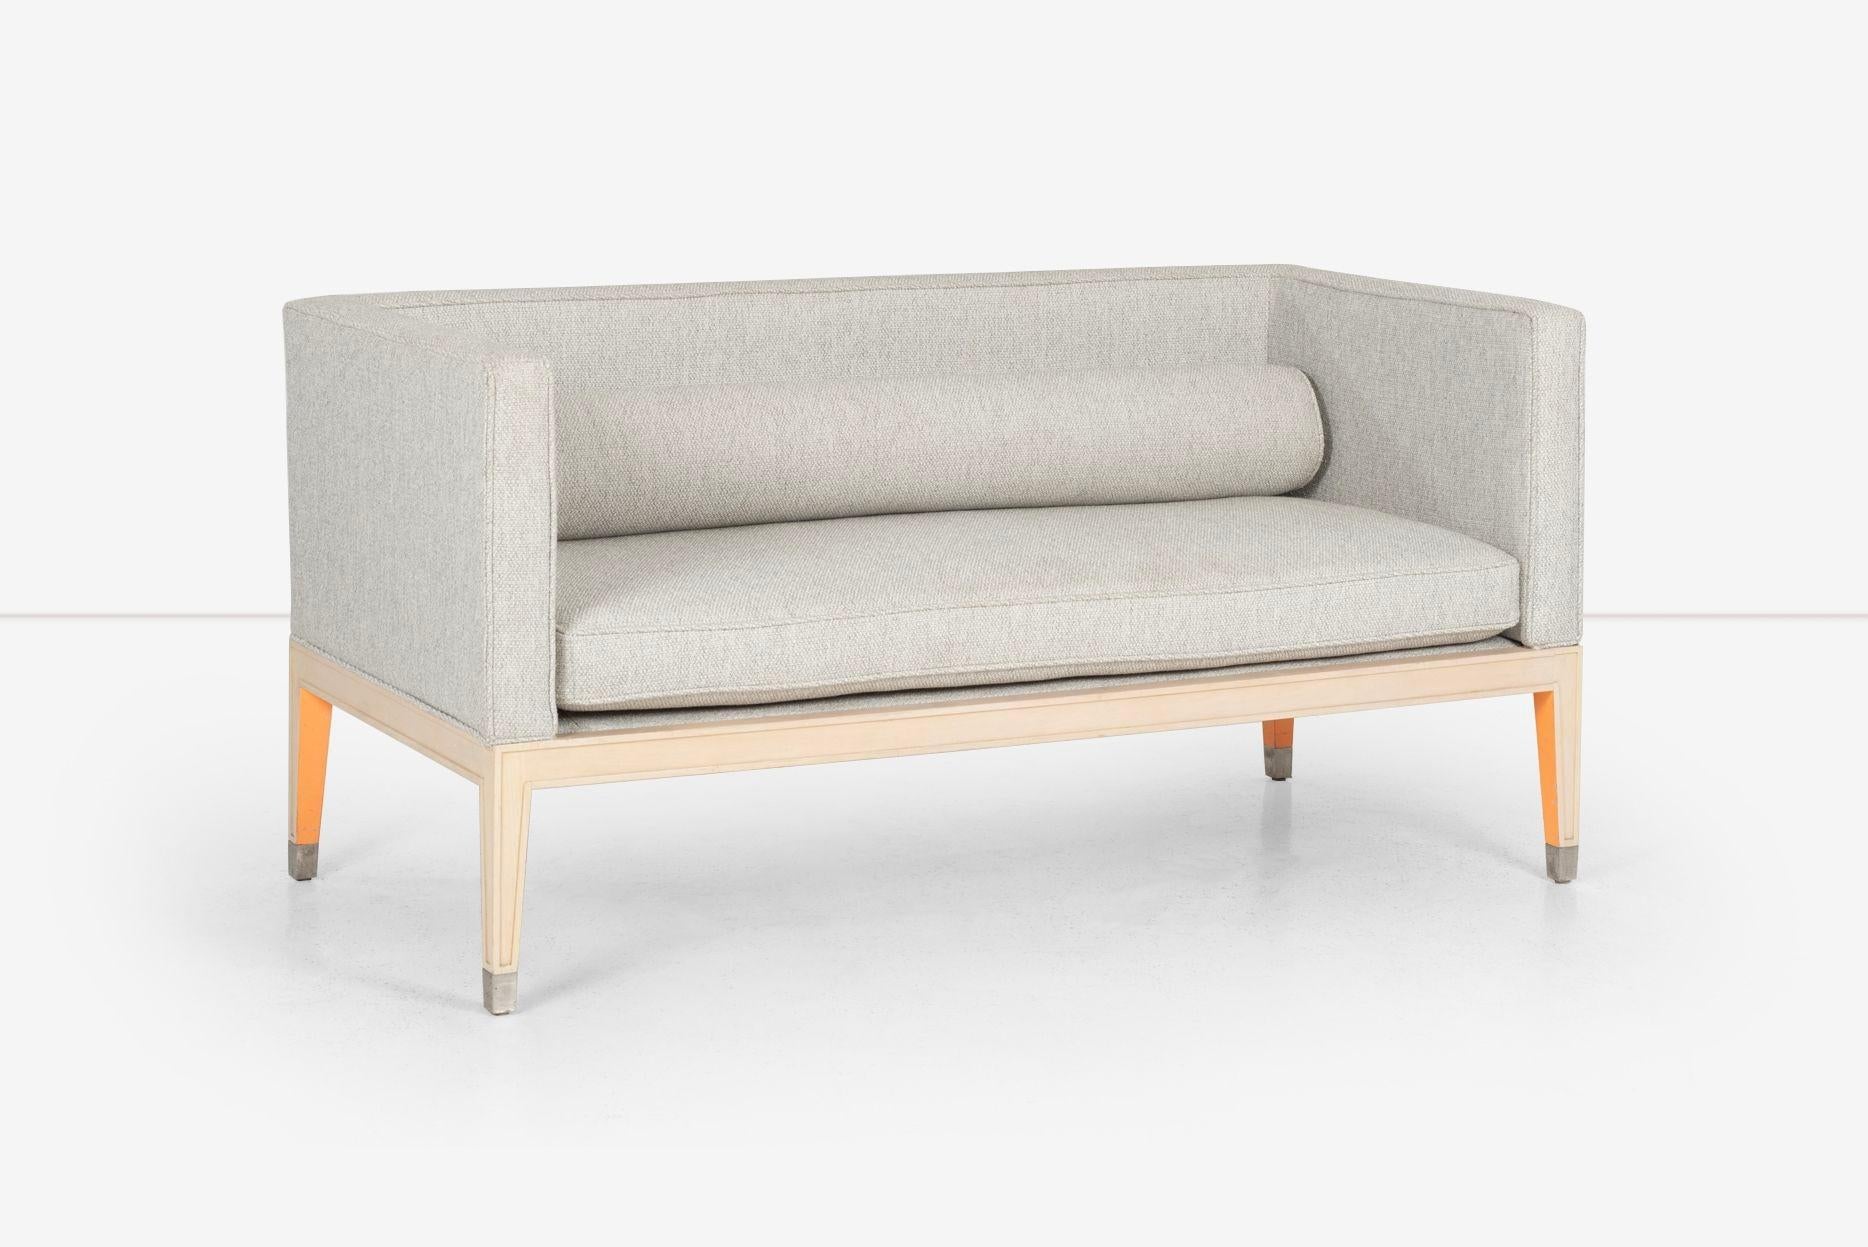 Post-Modern Phillipe Starck Sofa from the Clift Hotel San Fransisco For Sale